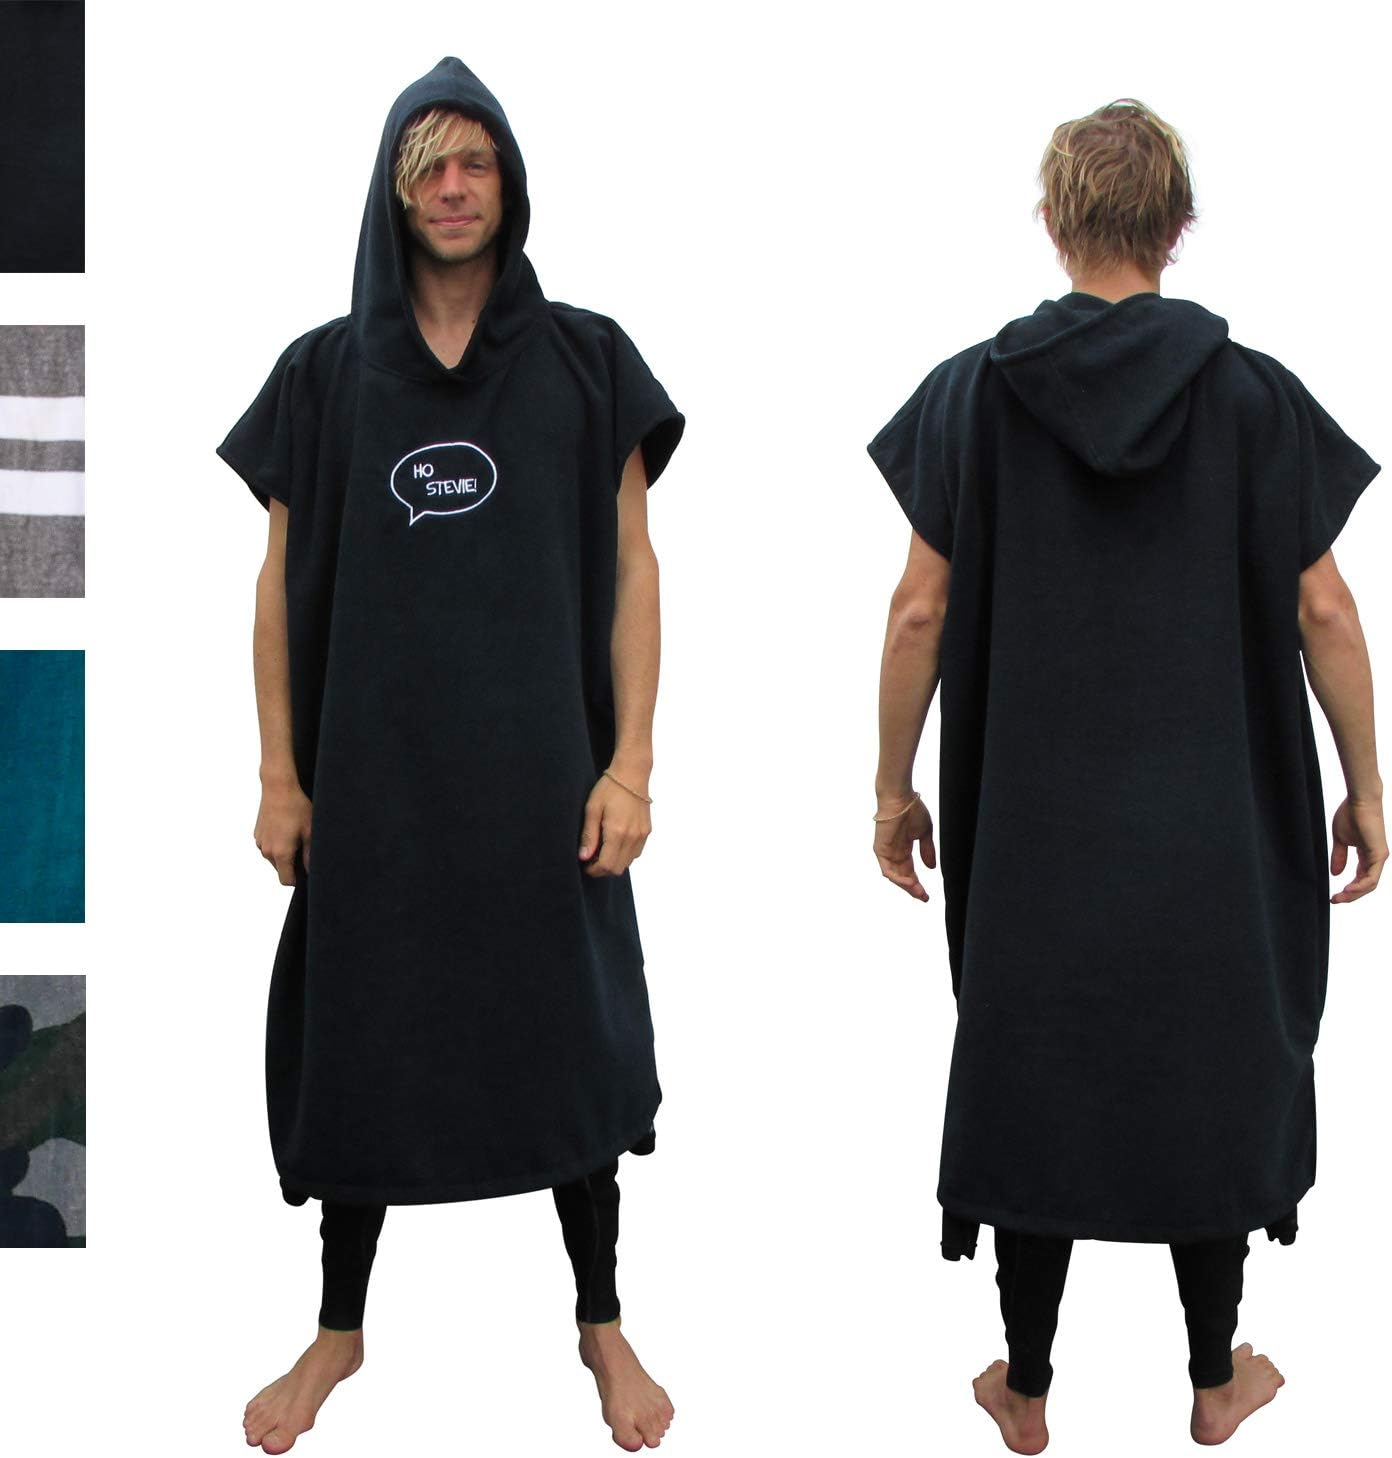 One-Size-Fits-All Surfer’s Poncho